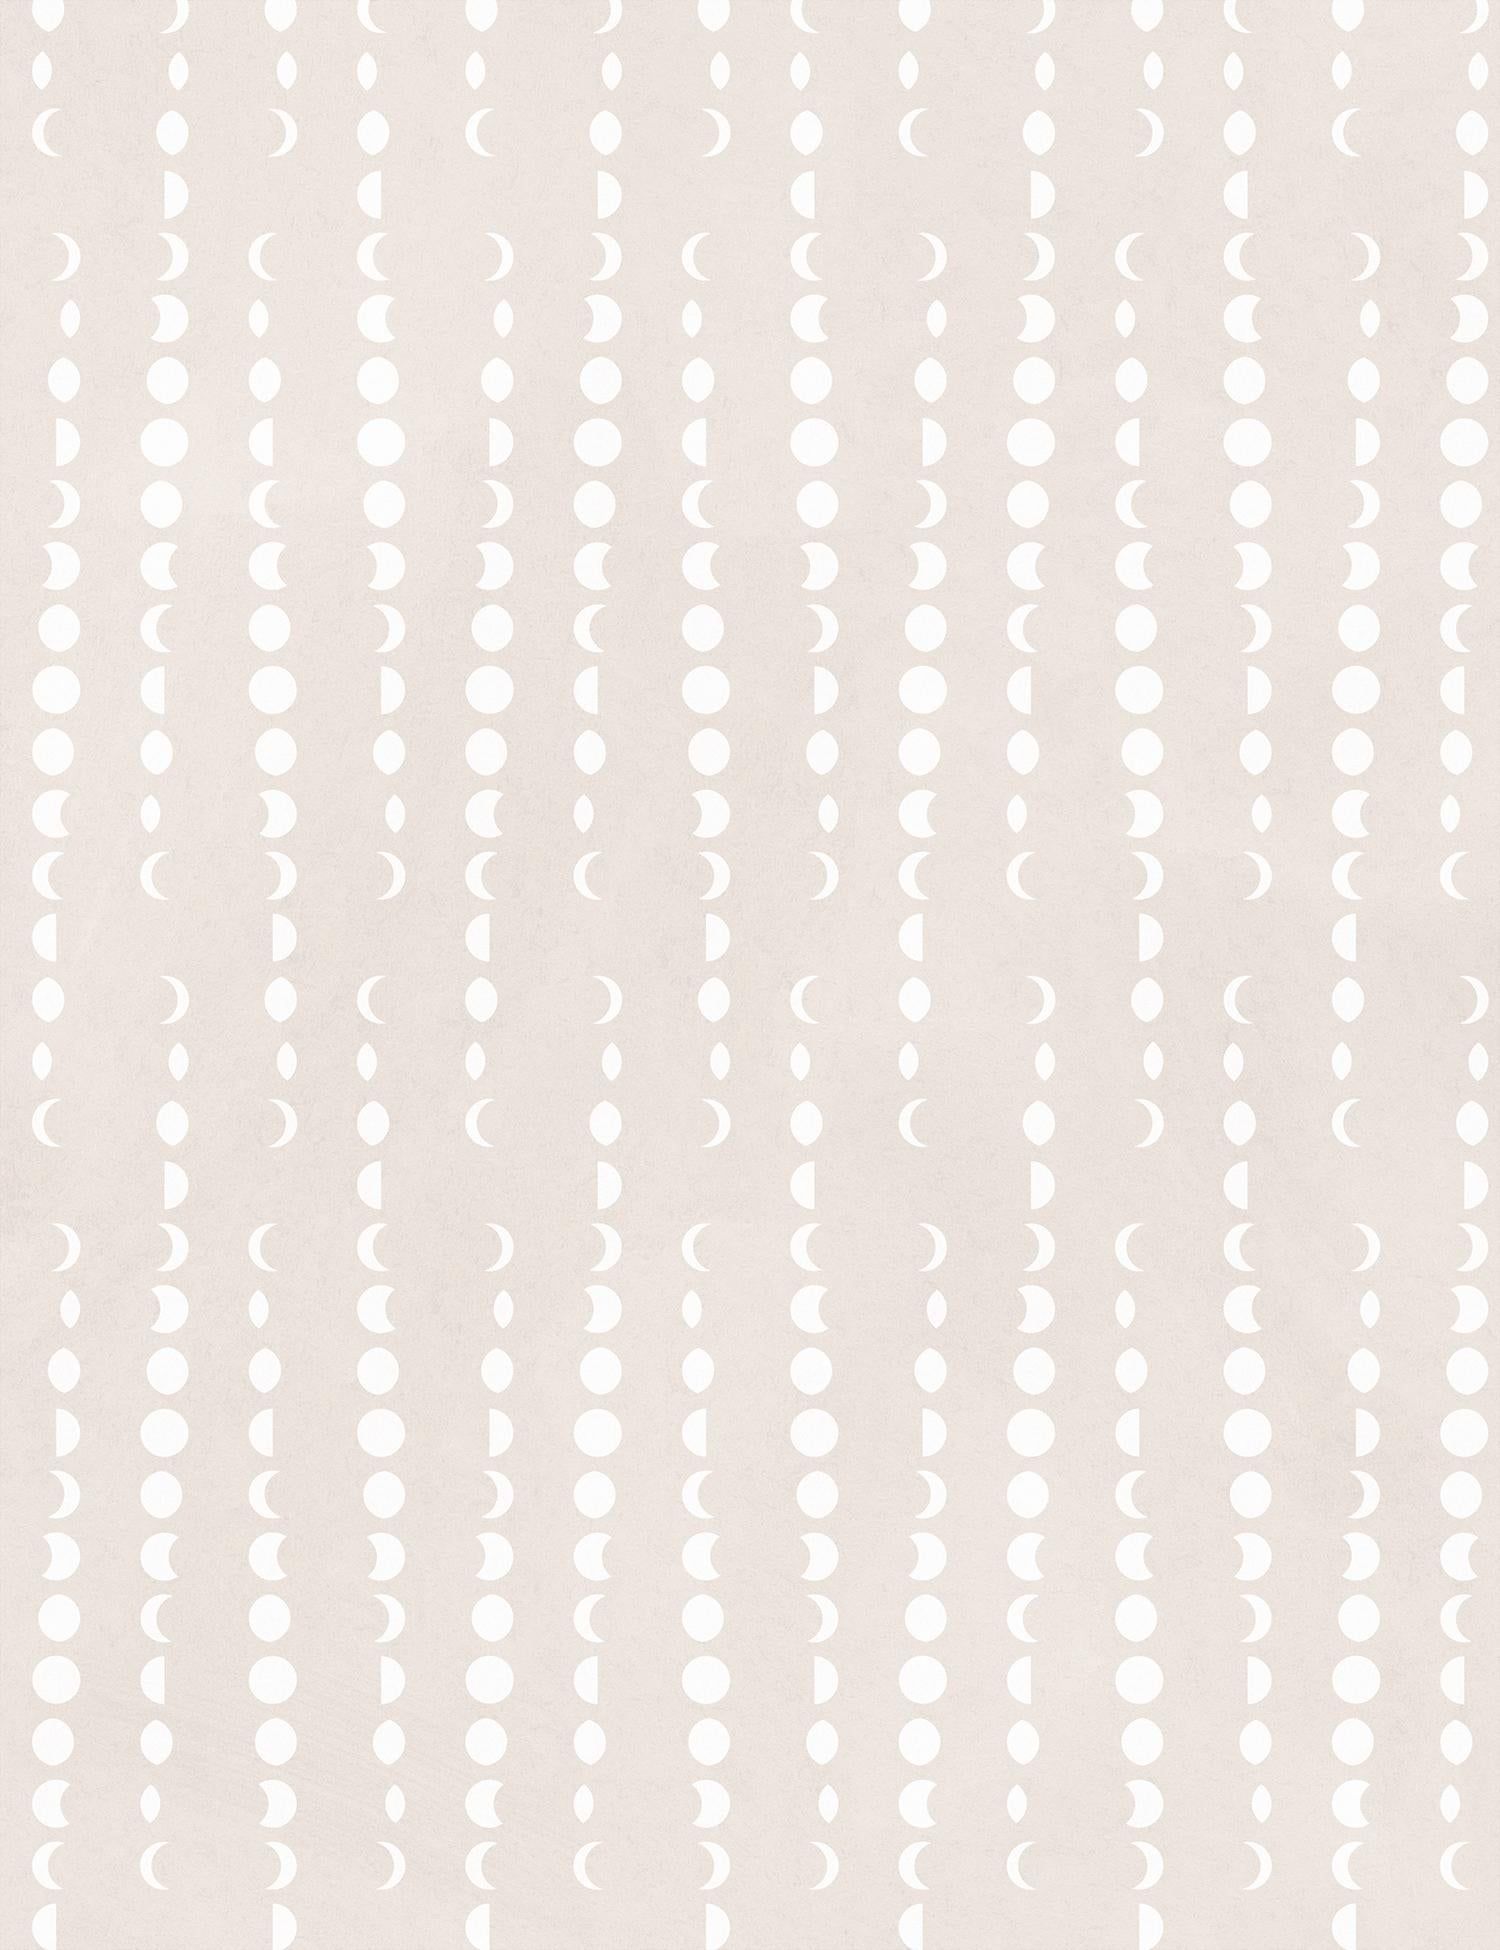 A white and gray pattern with dots - Neutral